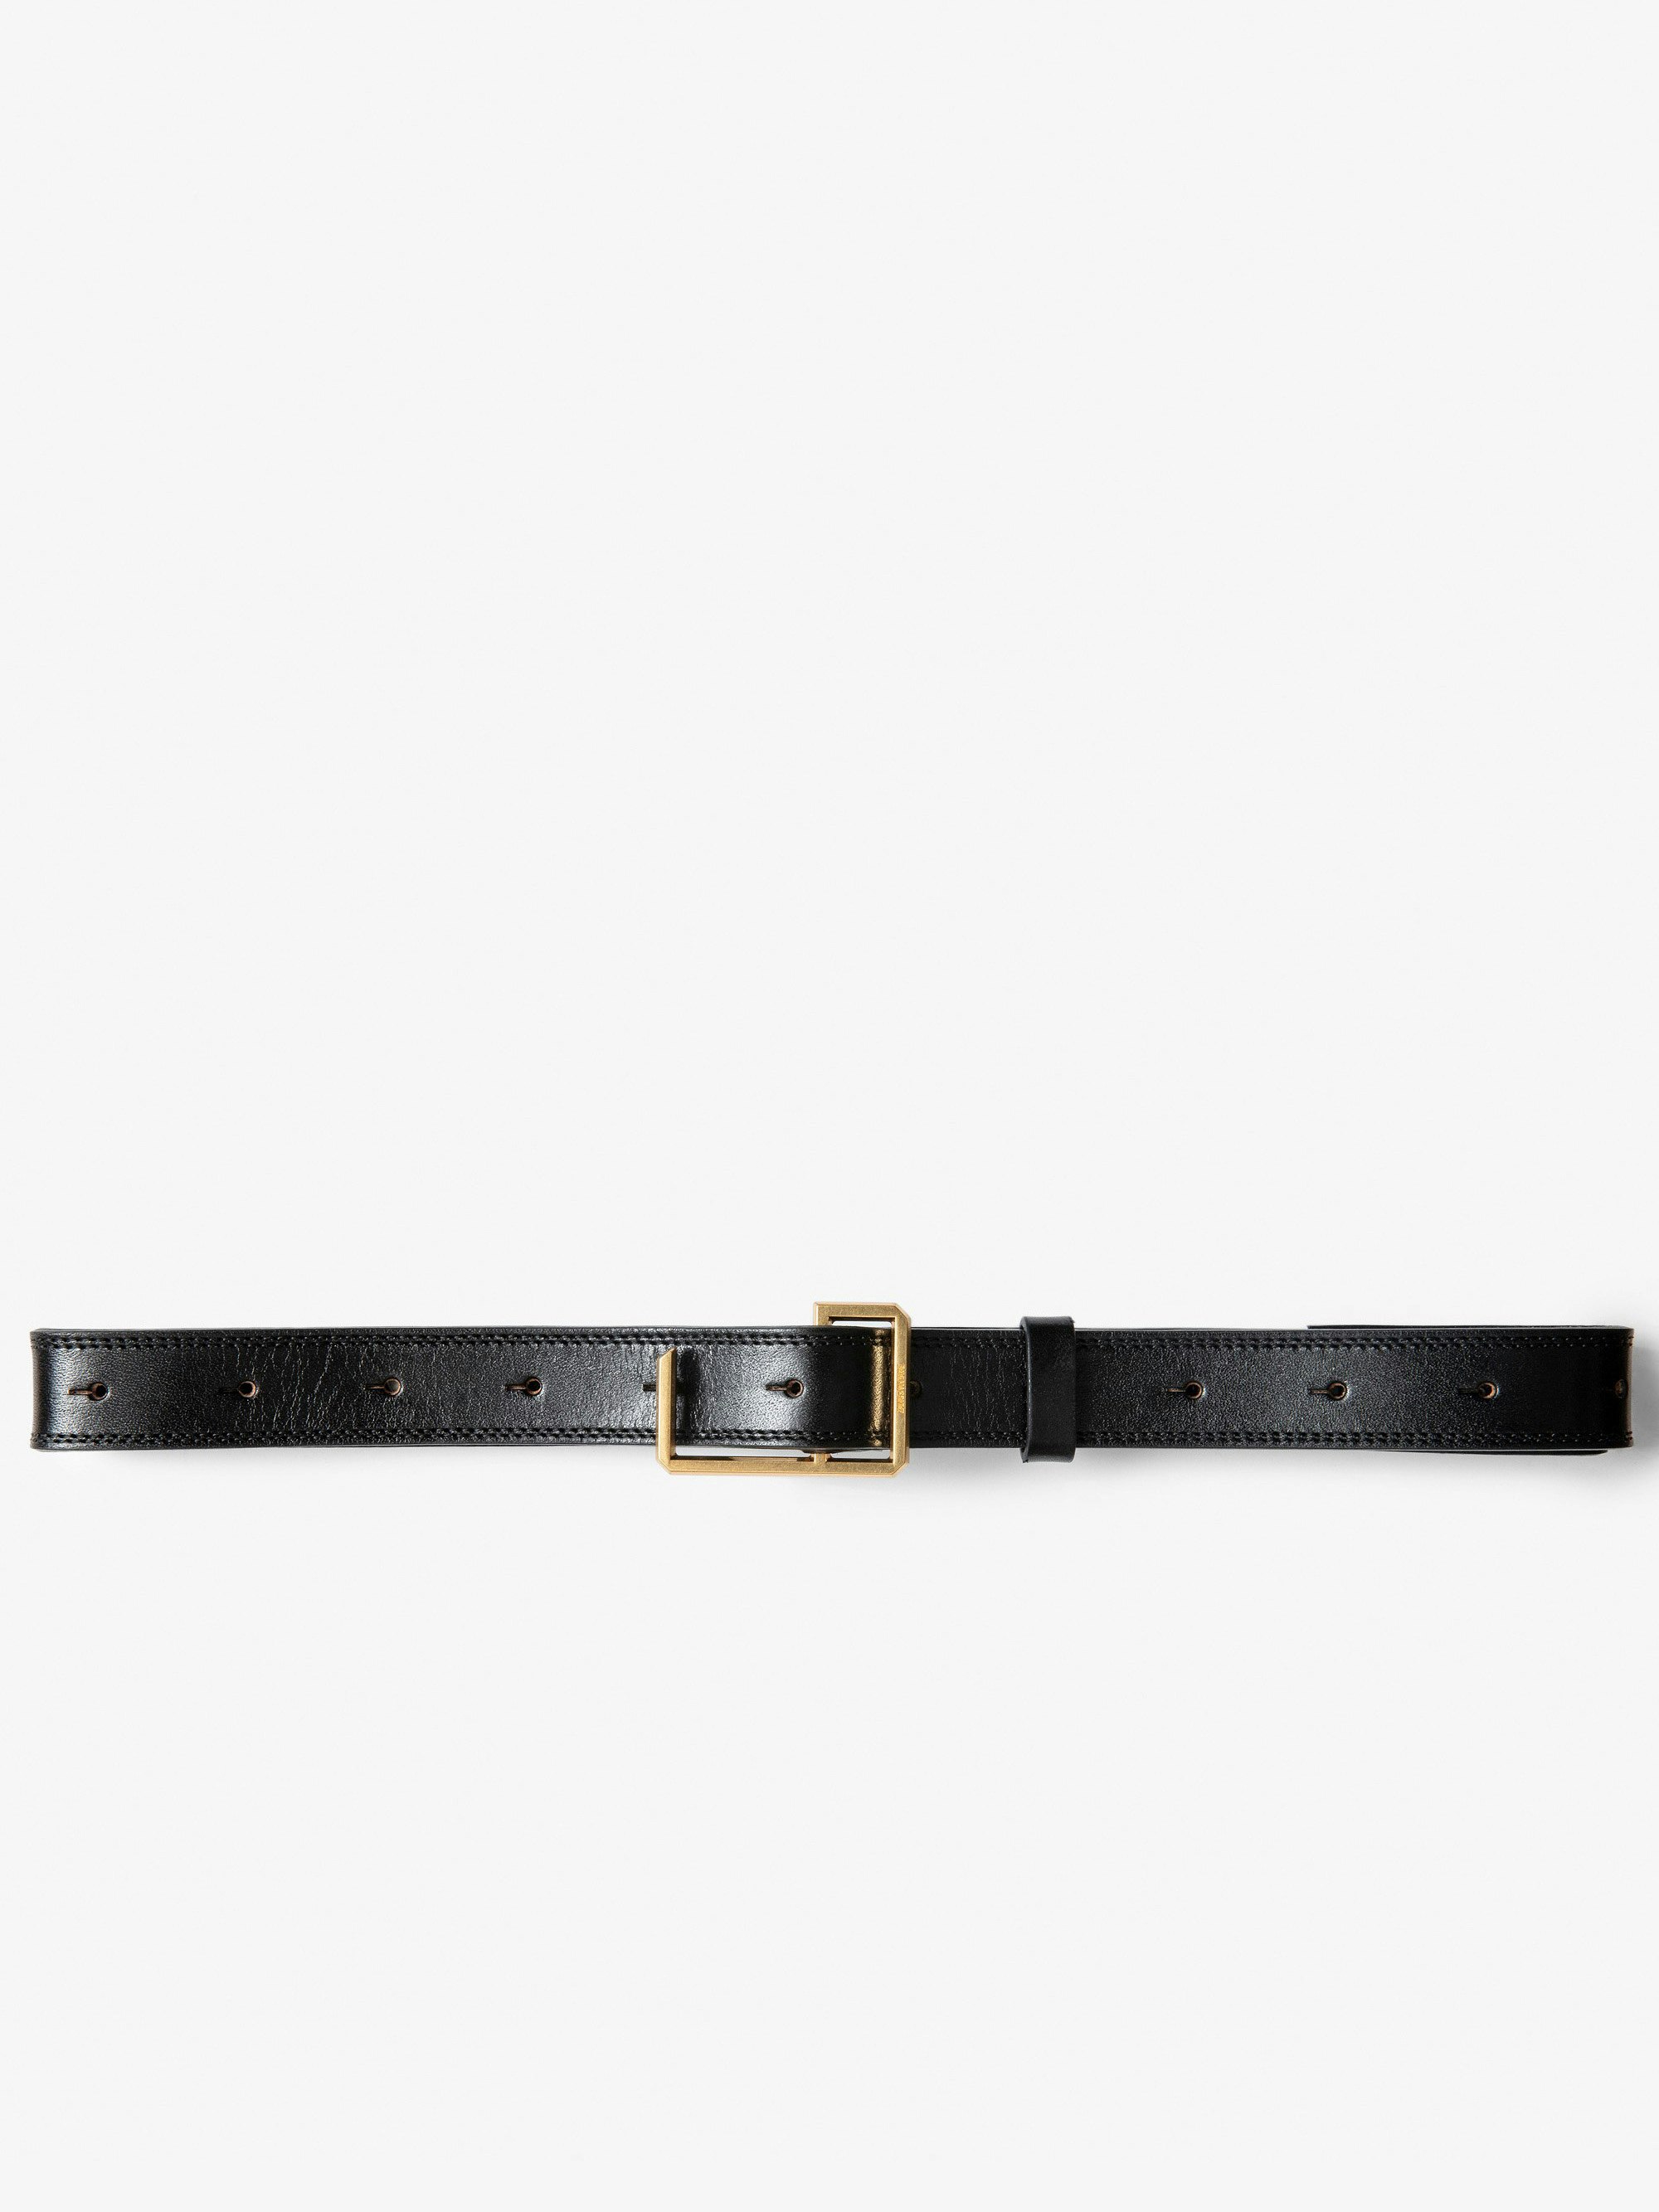 La Cecilia Obsession Belt - Women's belt in black leather with gold-tone C buckle